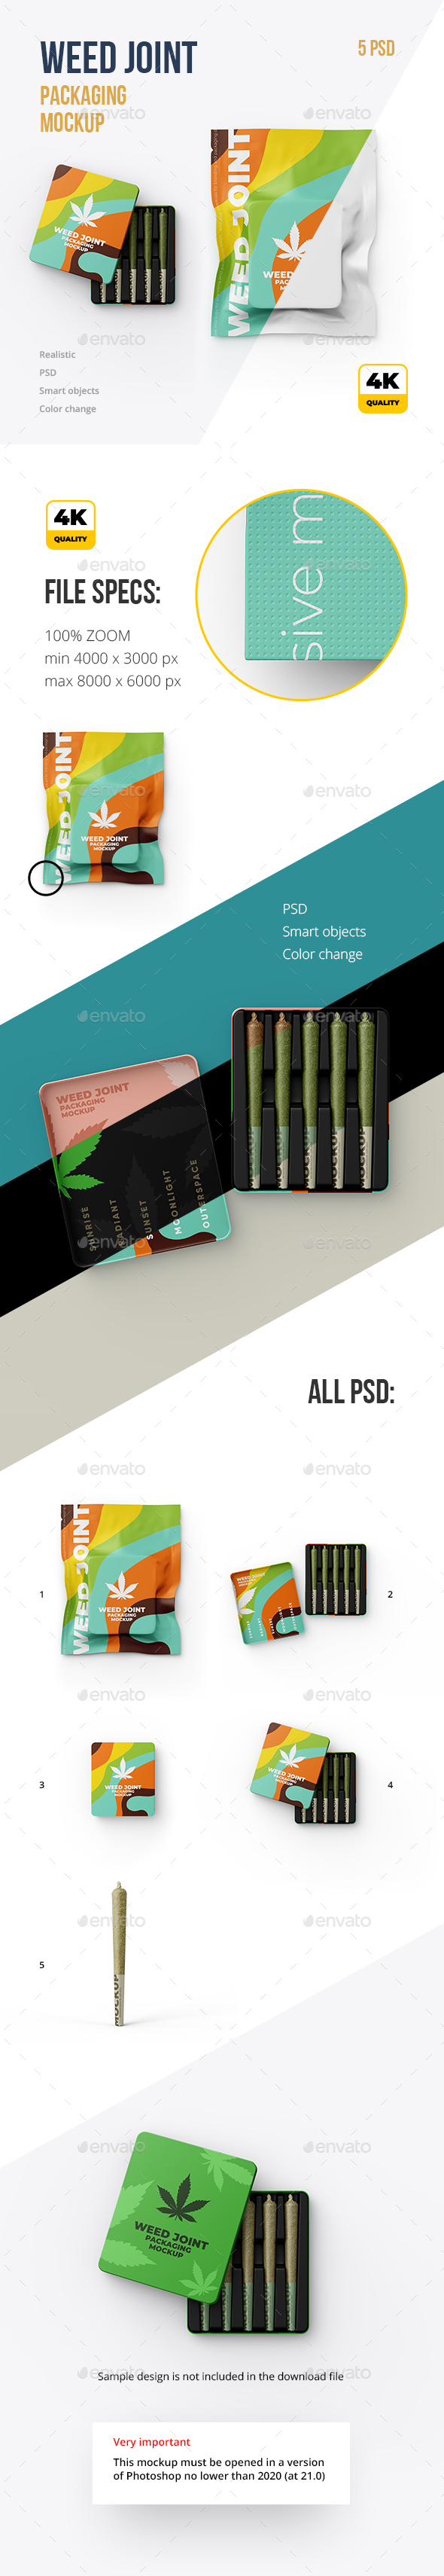 Download Weed Product Mockups From Graphicriver